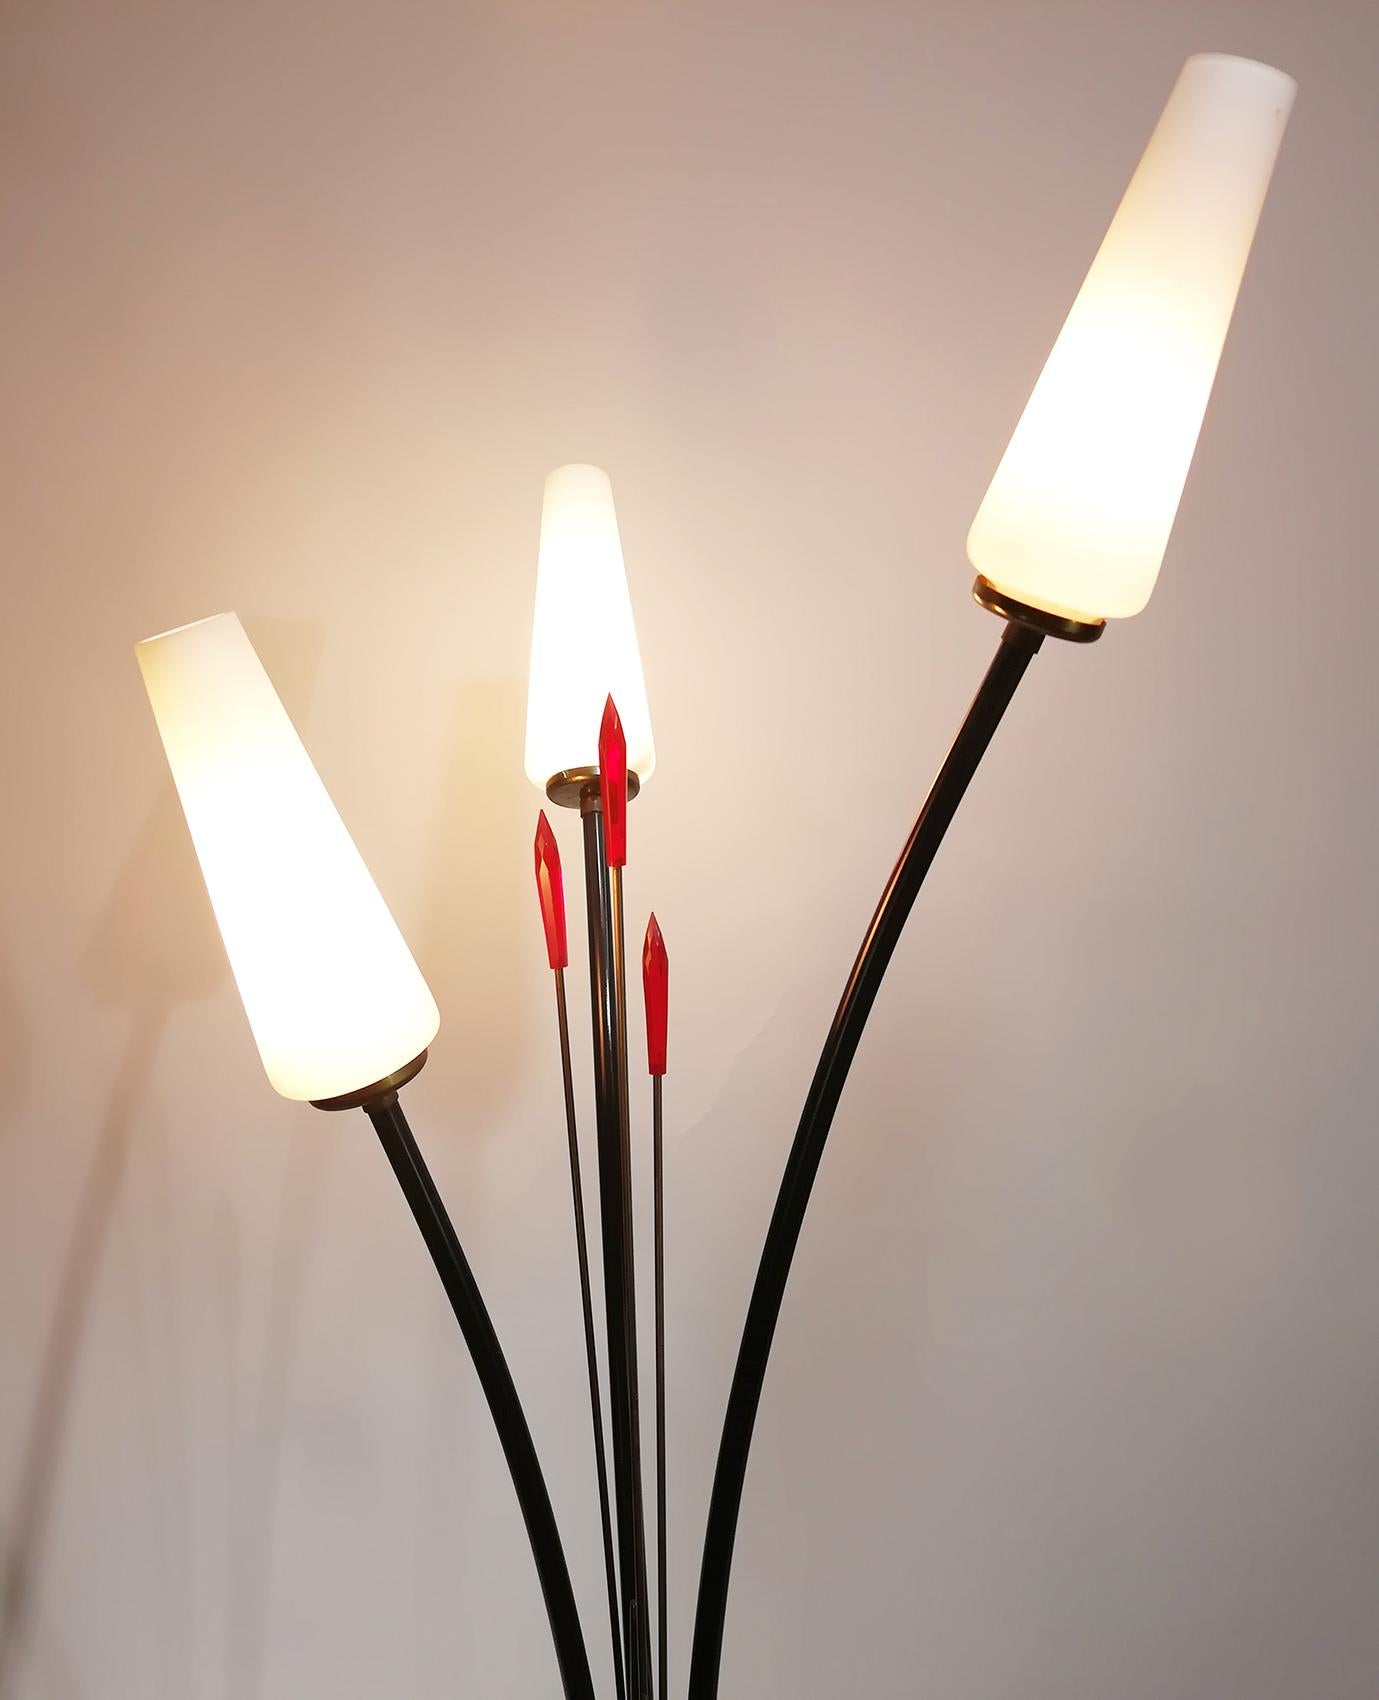 A great Stilnovo style floor lamp with three glass shades and red Lucite lance, made in the 1950s in Italy. This elegant flower-like lamp is made of brass.
The suave and elegant look is characteristic for the Italian design of the 1940s and 1950s.